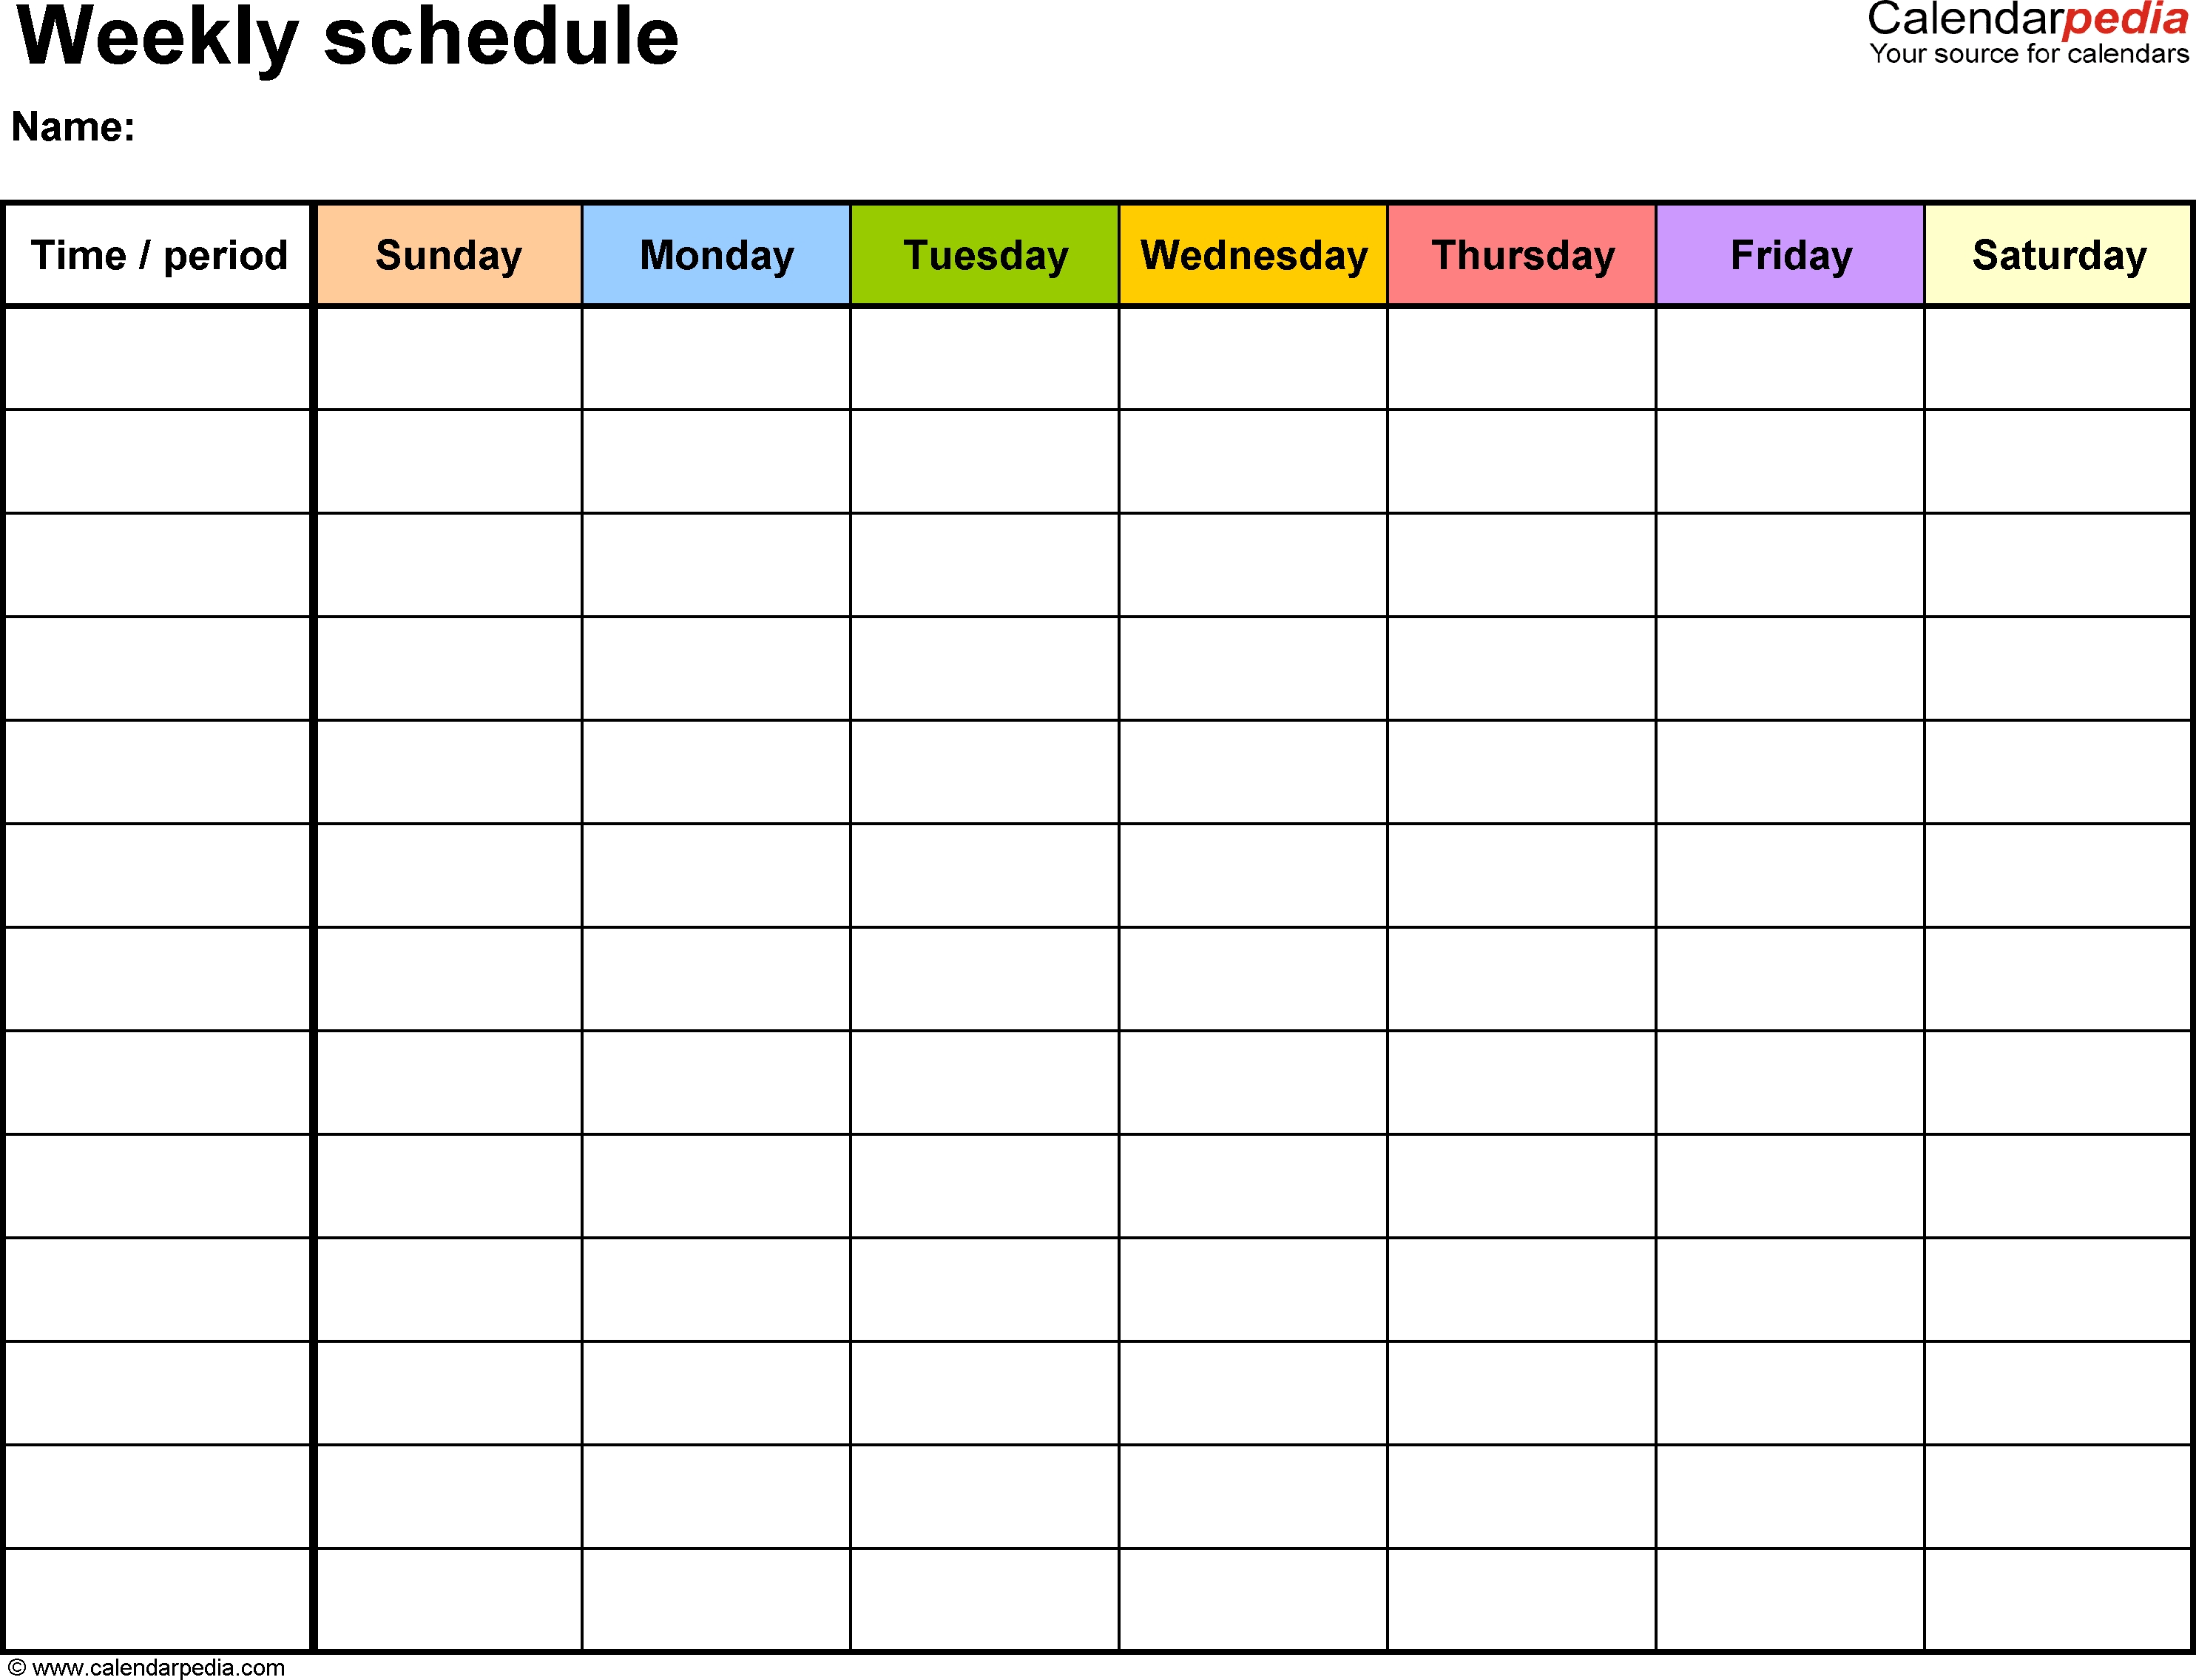 Free Weekly Schedule Templates For Excel - 18 Templates in Blank Calendar 5 Day Week With Times